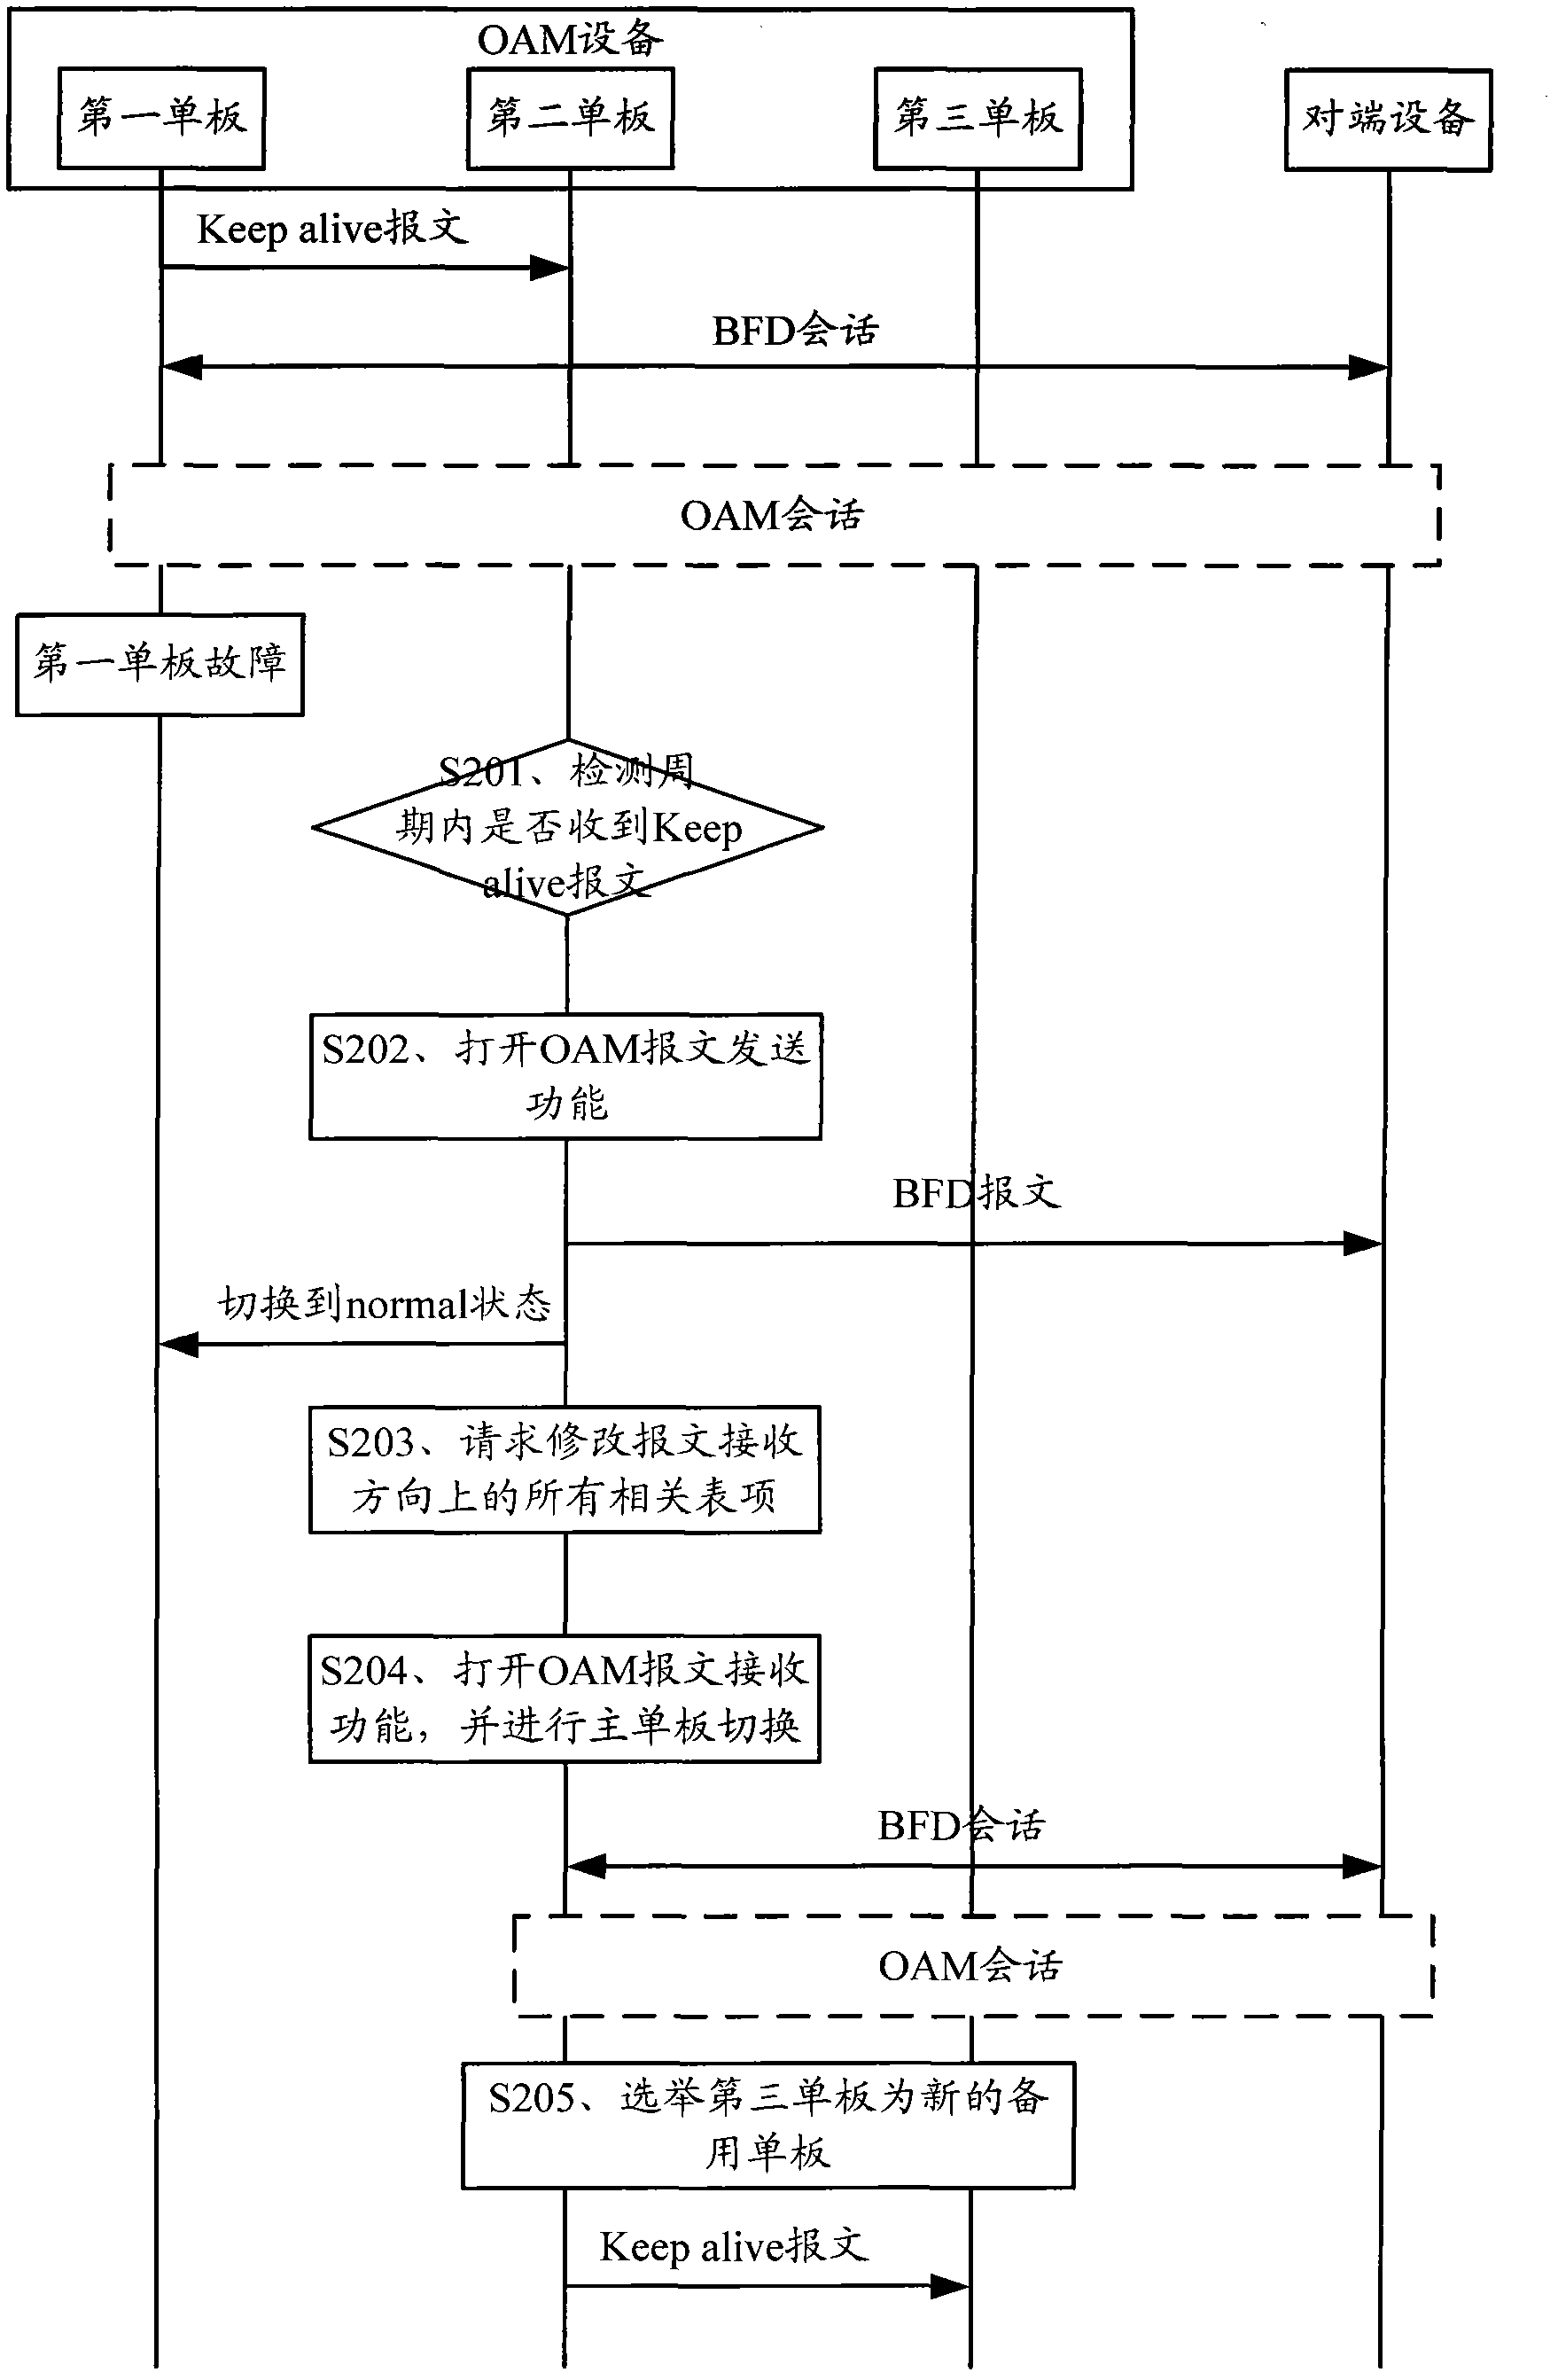 Method and device for preventing BFD (bidirectional forwarding detection) conversation interruption